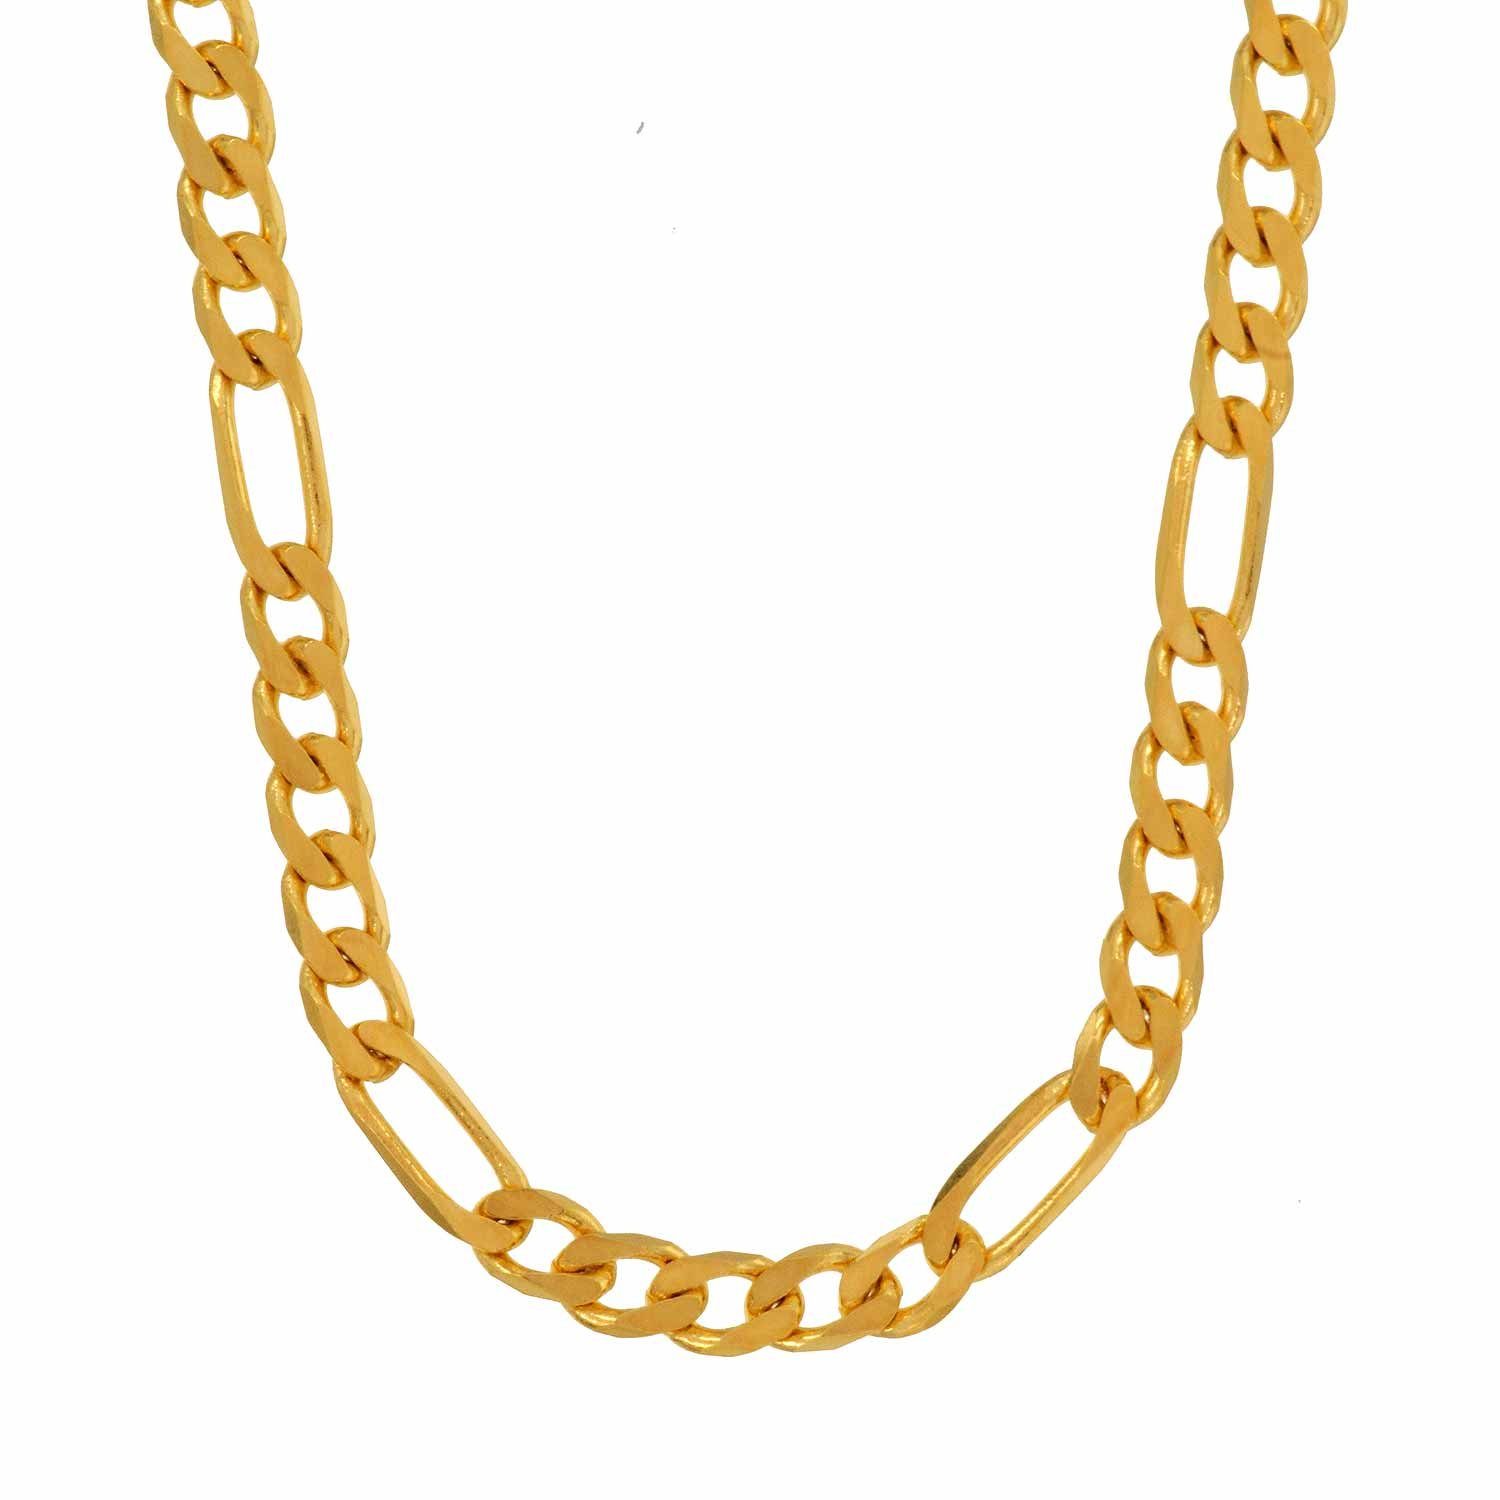 Goldkette, Made in HOPLO Germany